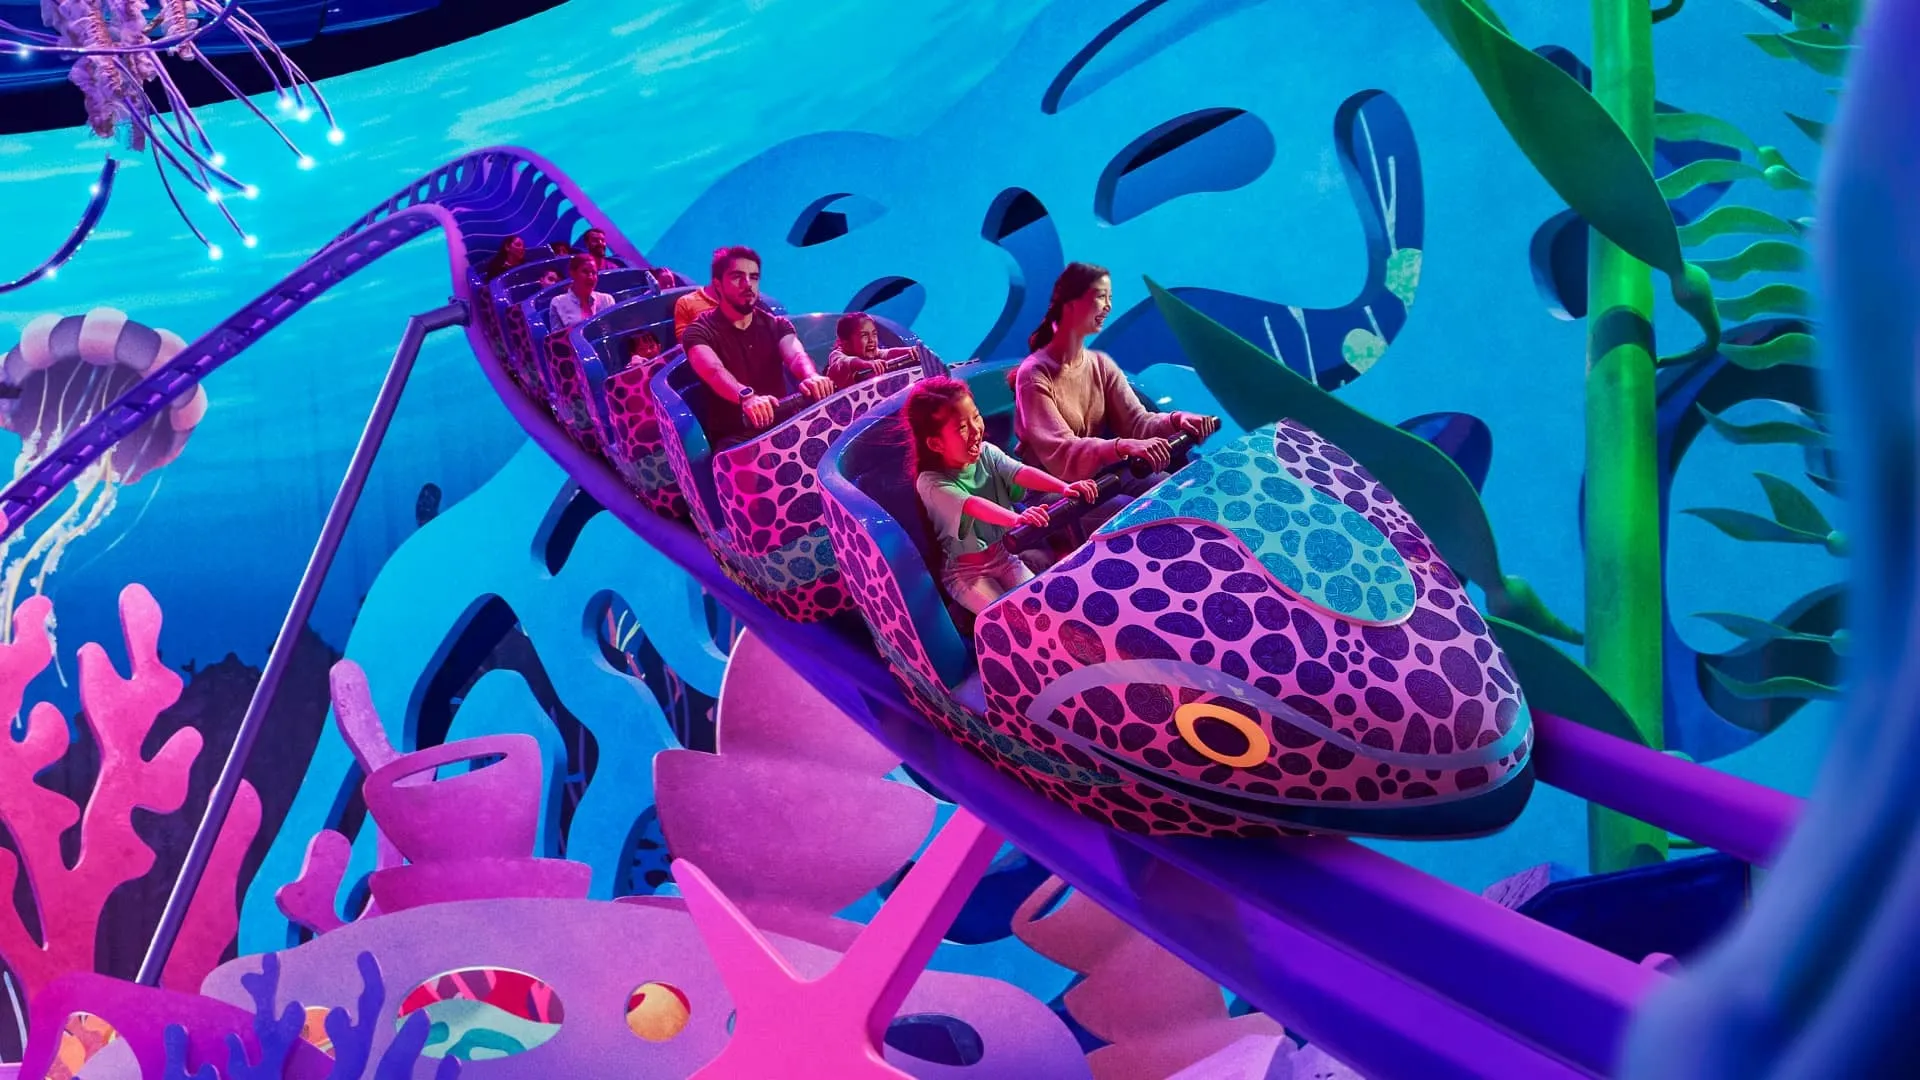 4. Eel Racer On the Eel Racer, riders can enjoy an epic view of MicroOcean as they slither and dart through the vibrant surroundings, simulating the movements of a giant eel. This ride combines speed and thrills for an unforgettable underwater adventure.